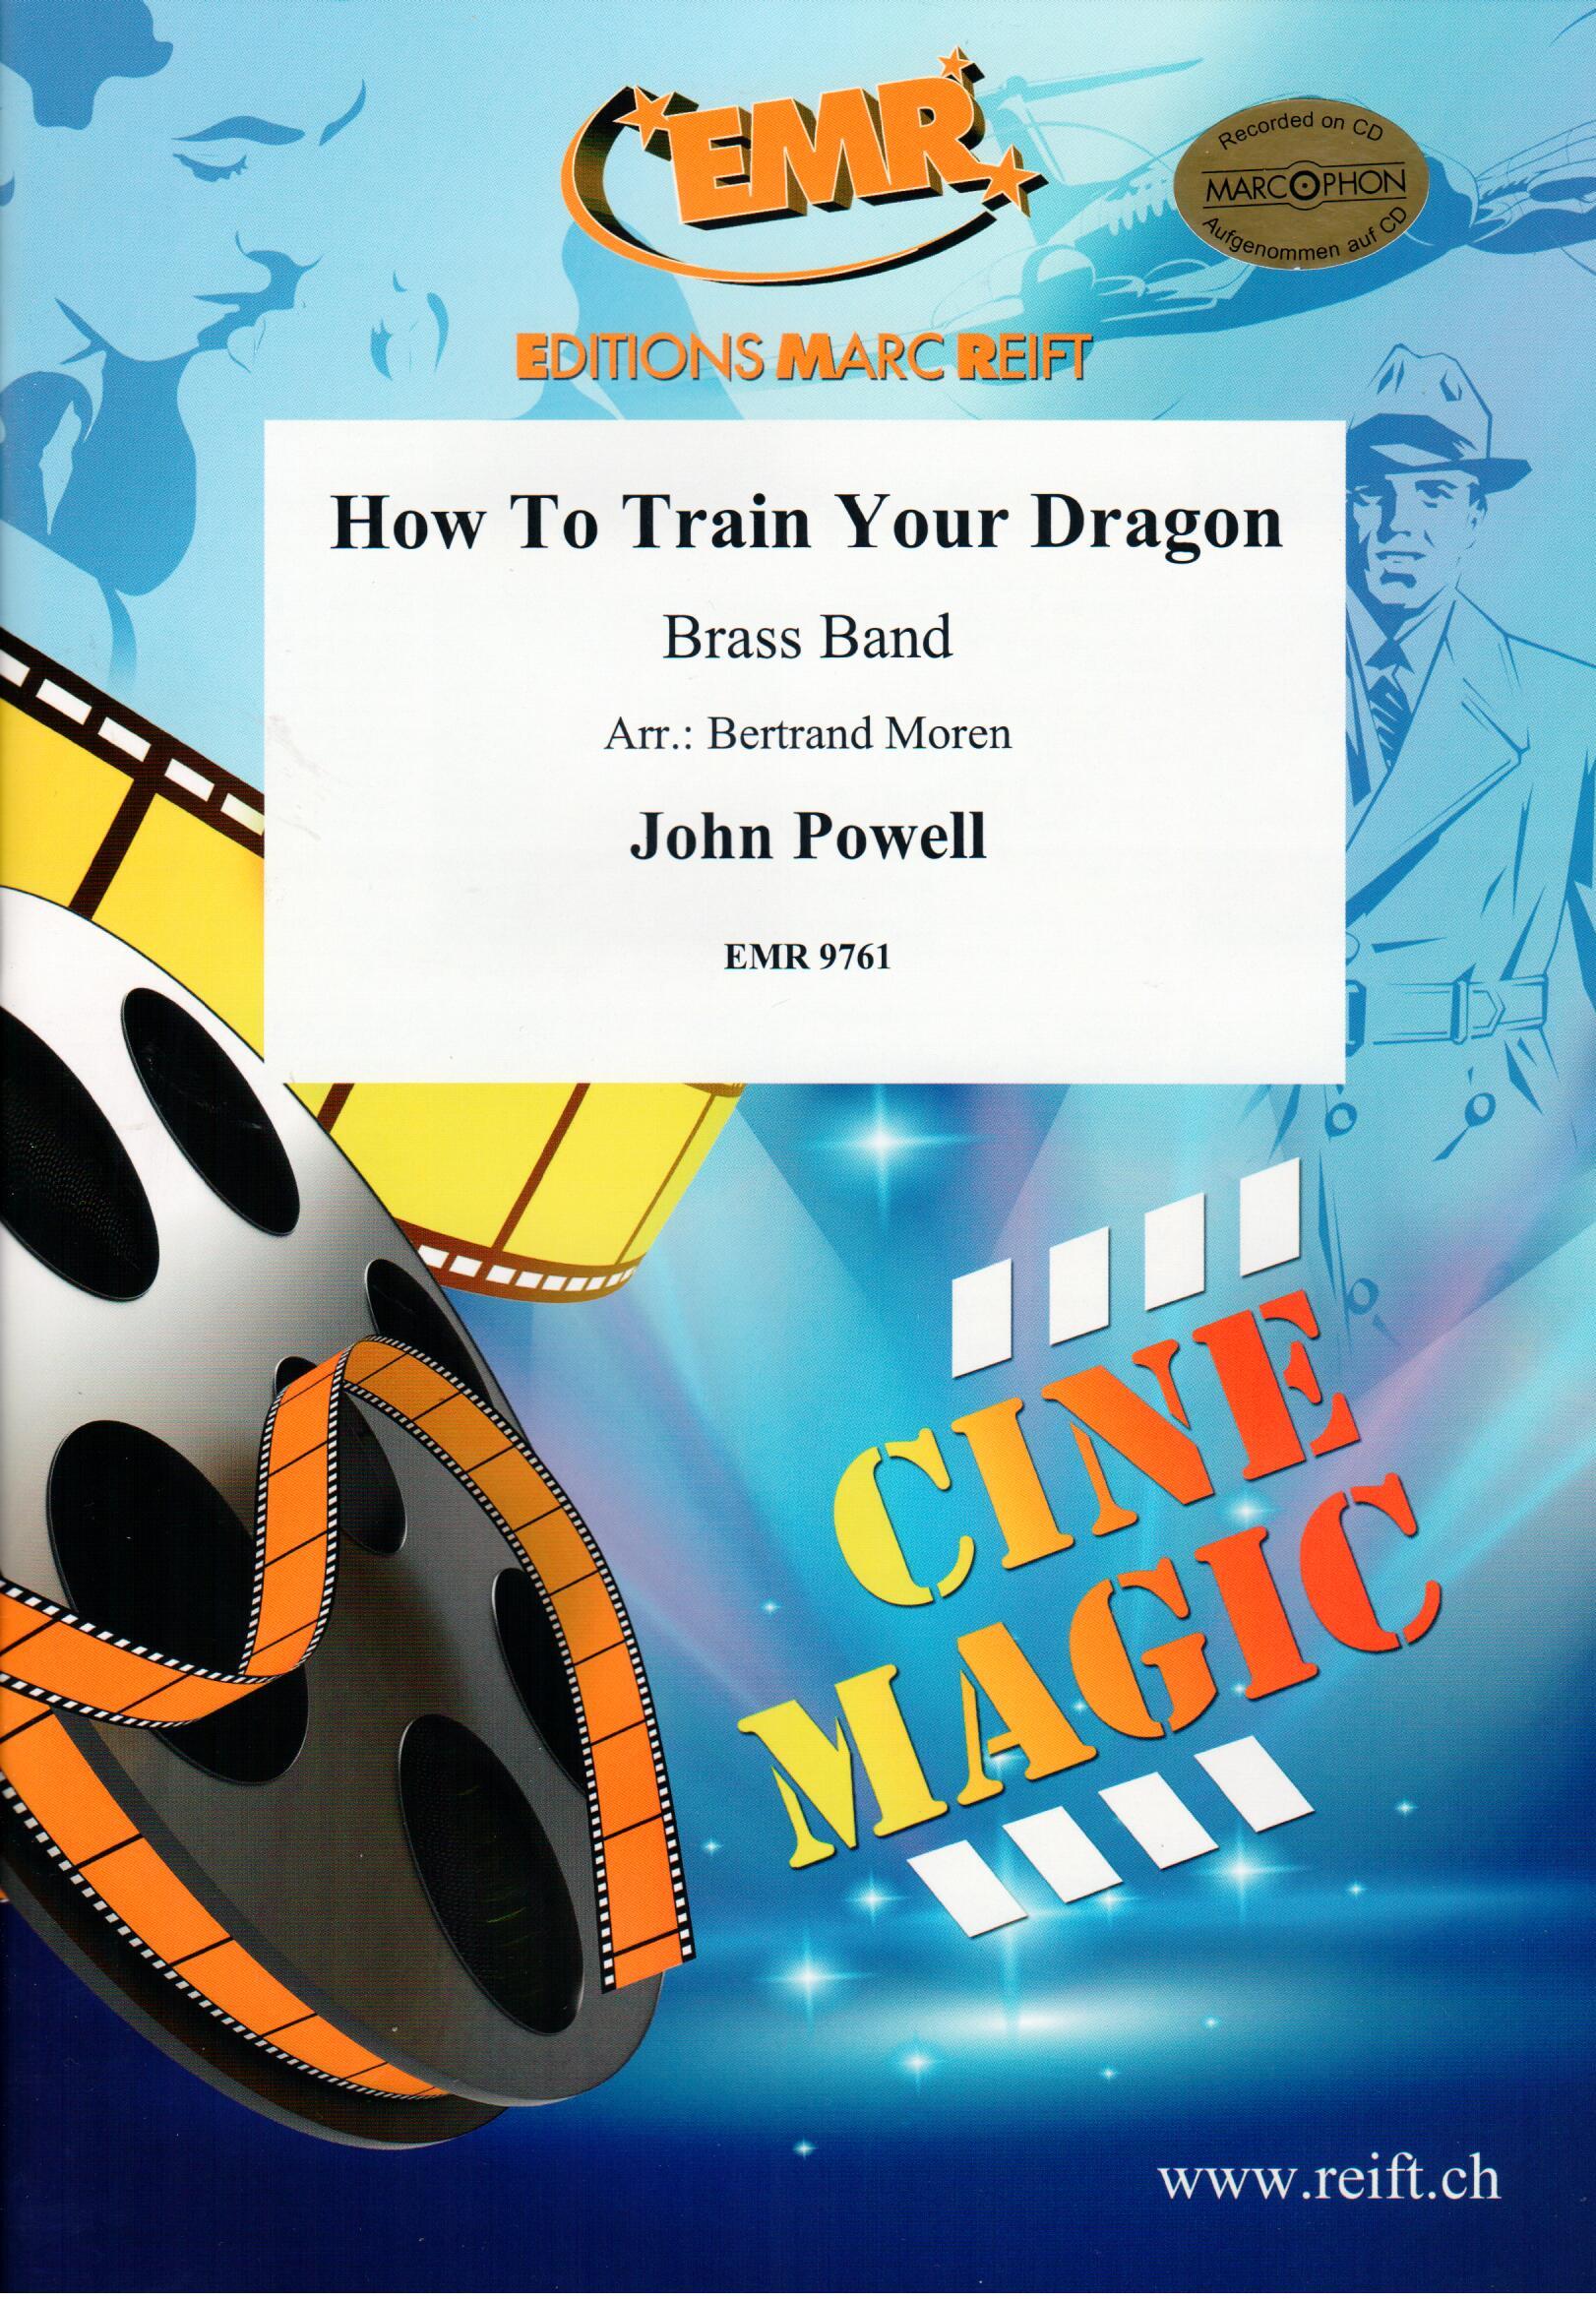 HOW TO TRAIN YOUR DRAGON - Parts & Score